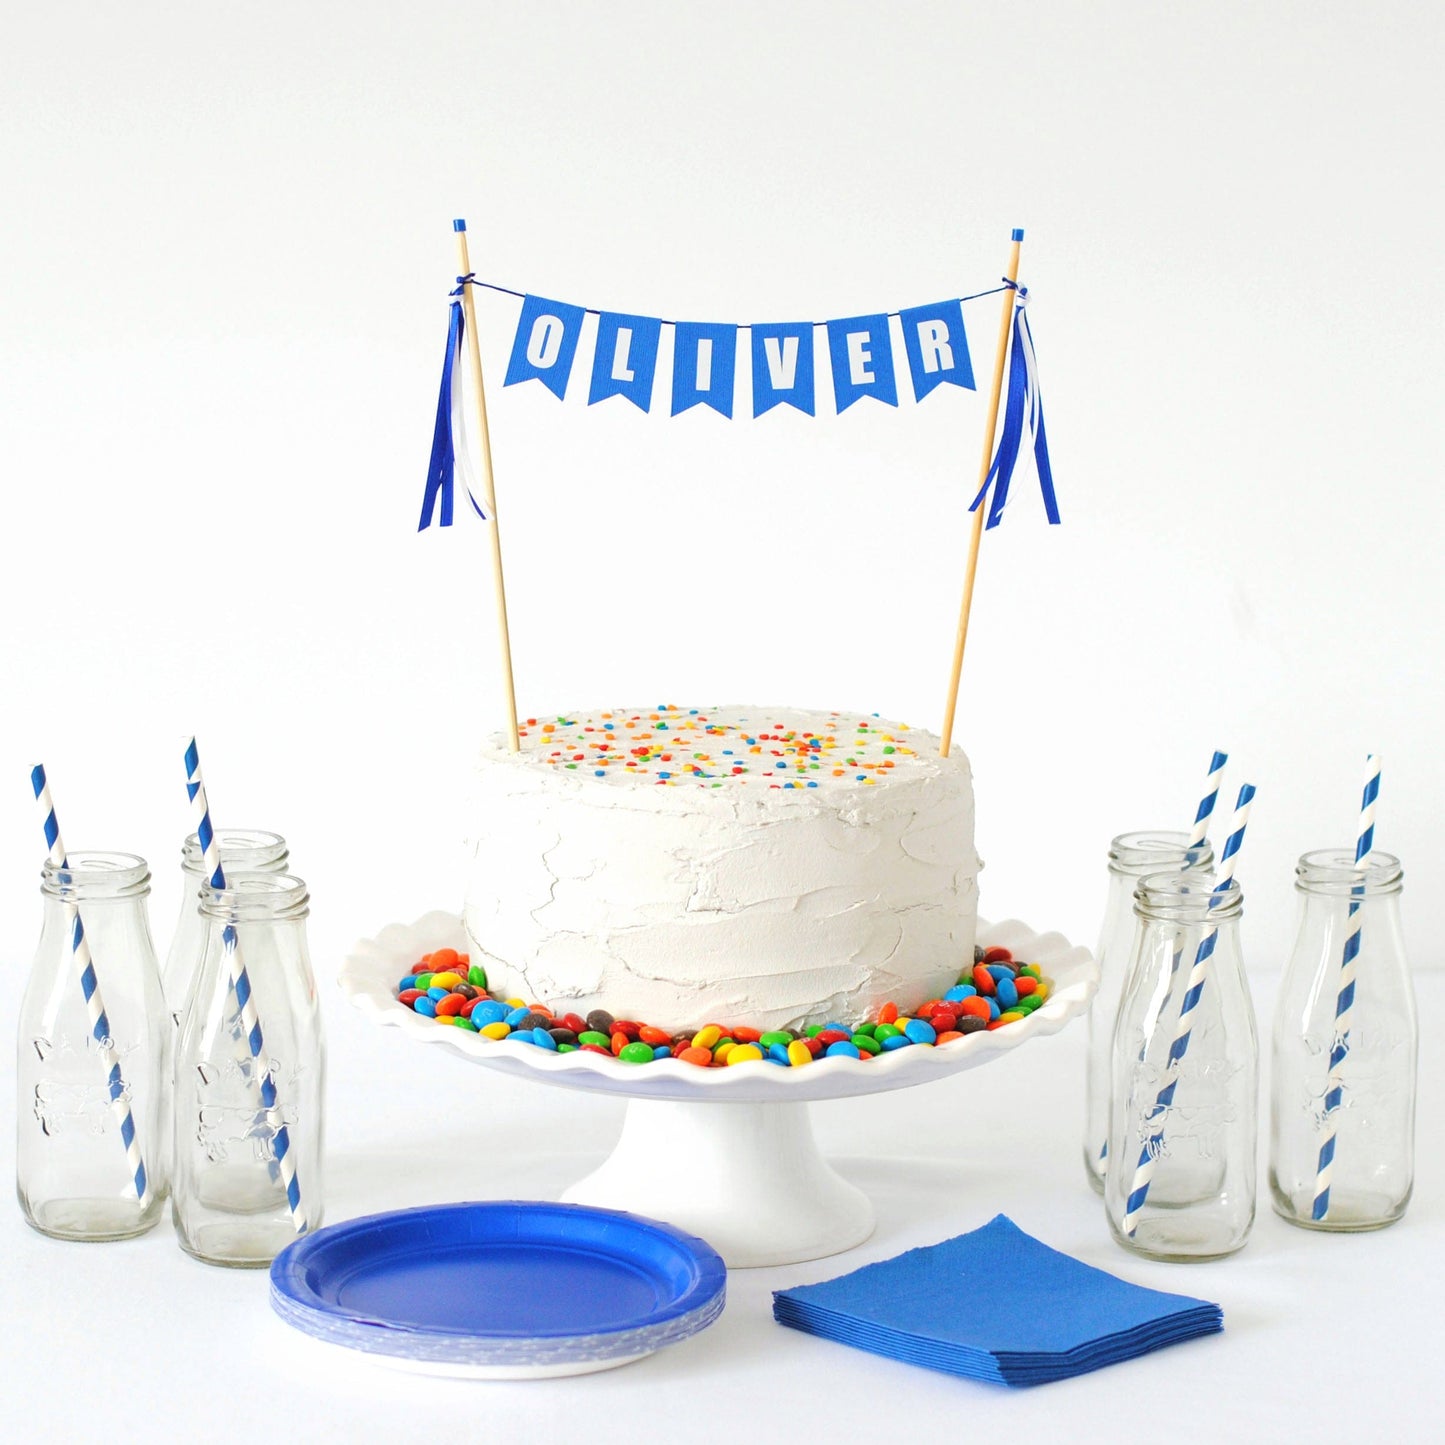 
                  
                    blue cake topper personalized with name for kids birthday cake. shown on a white cake with colorful sprinkles
                  
                